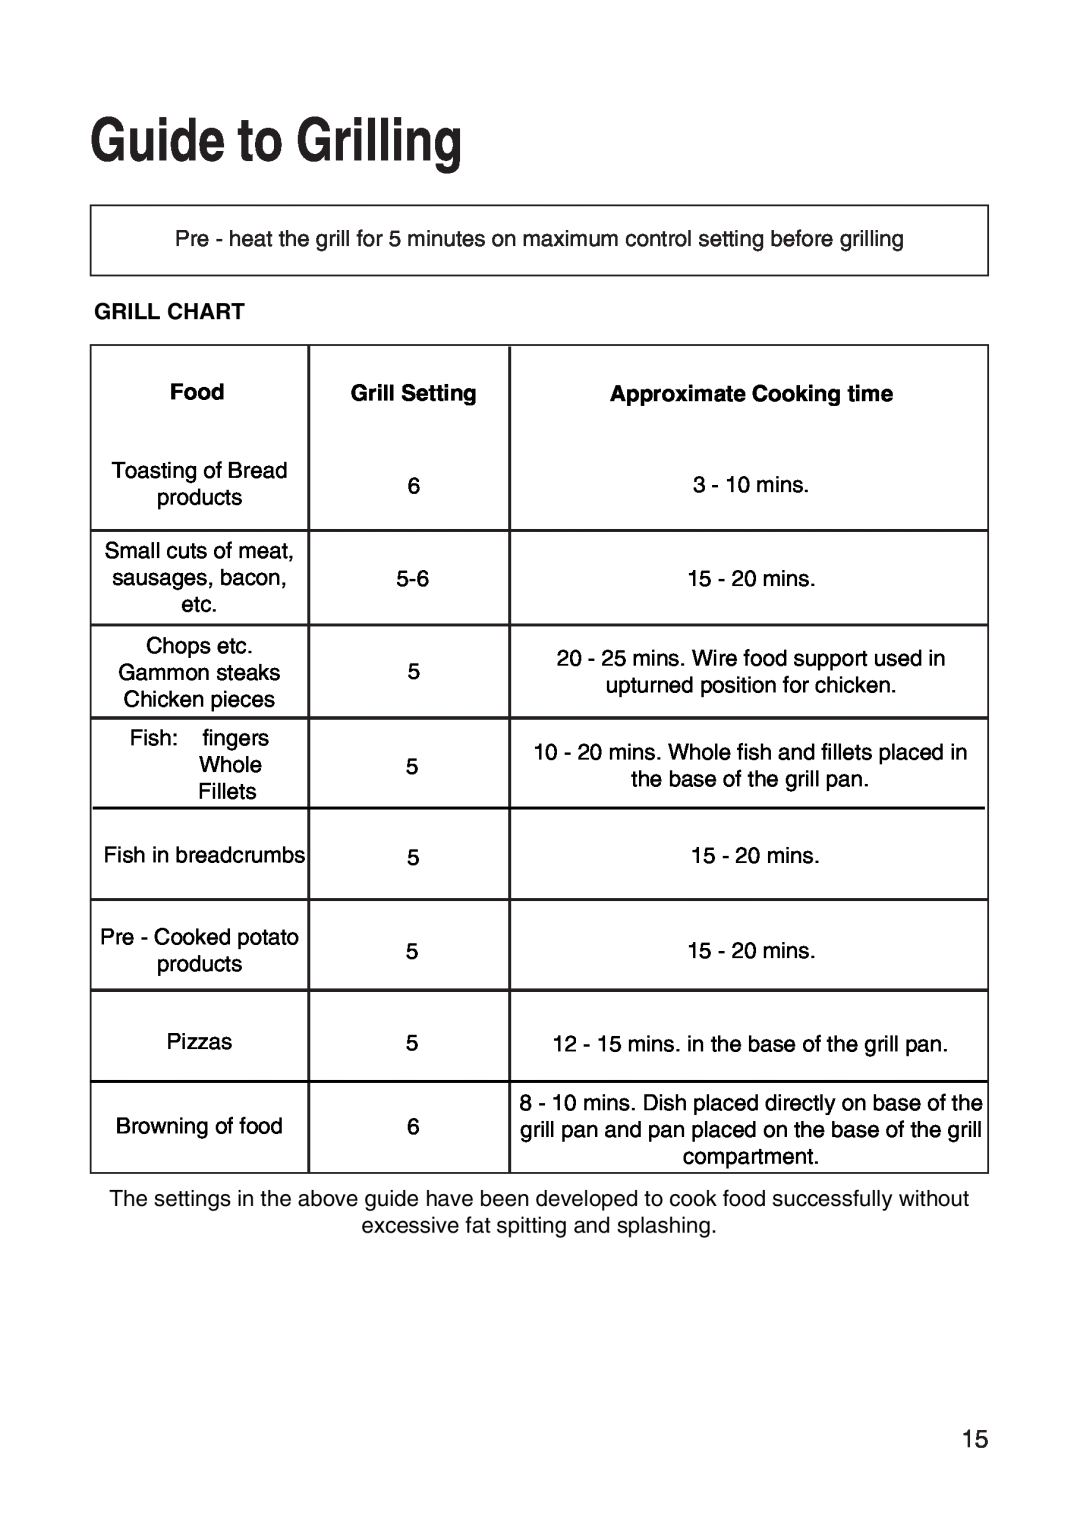 Hotpoint EW31 installation instructions Guide to Grilling, Grill Chart, Food, Grill Setting, Approximate Cooking time 